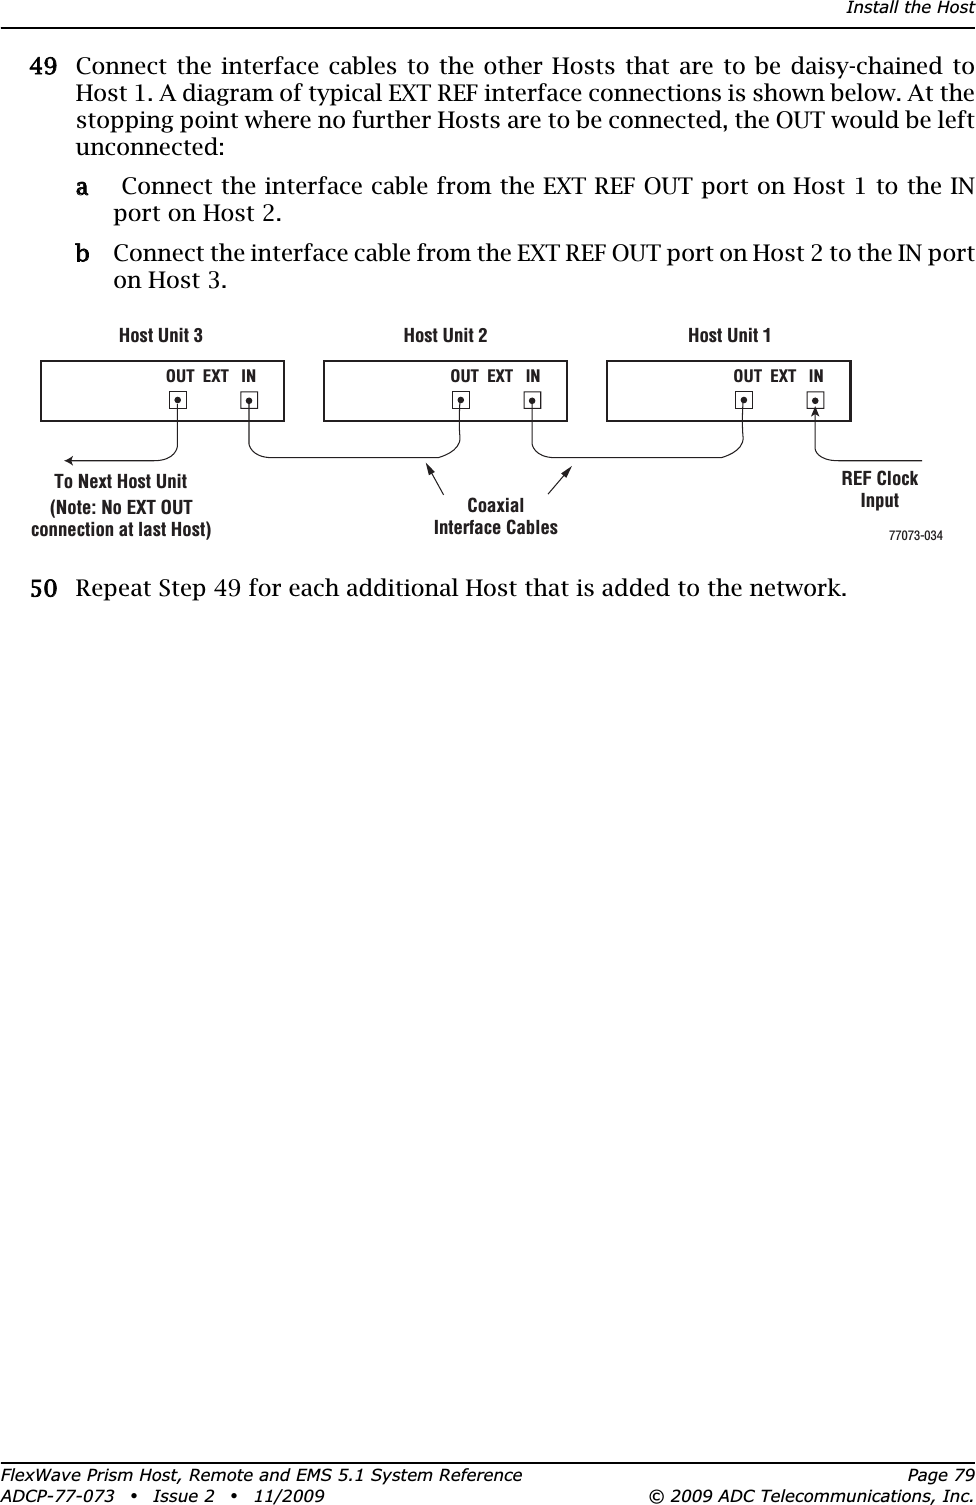 Install the HostFlexWave Prism Host, Remote and EMS 5.1 System Reference Page 79ADCP-77-073 • Issue 2 • 11/2009 © 2009 ADC Telecommunications, Inc.499 Connect the interface cables to the other Hosts that are to be daisy-chained to Host 1. A diagram of typical EXT REF interface connections is shown below. At the stopping point where no further Hosts are to be connected, the OUT would be left unconnected:aa  Connect the interface cable from the EXT REF OUT port on Host 1 to the IN port on Host 2.bb Connect the interface cable from the EXT REF OUT port on Host 2 to the IN port on Host 3.500 Repeat Step 49 for each additional Host that is added to the network.Host Unit 3 Host Unit 2 Host Unit 1OUT  EXT   IN NET IN NET OUT NET IN NET OUT77073-034CoaxialInterface CablesTo Next Host Unit(Note: No EXT OUTconnection at last Host)OUT  EXT   IN OUT  EXT   INREF ClockInput